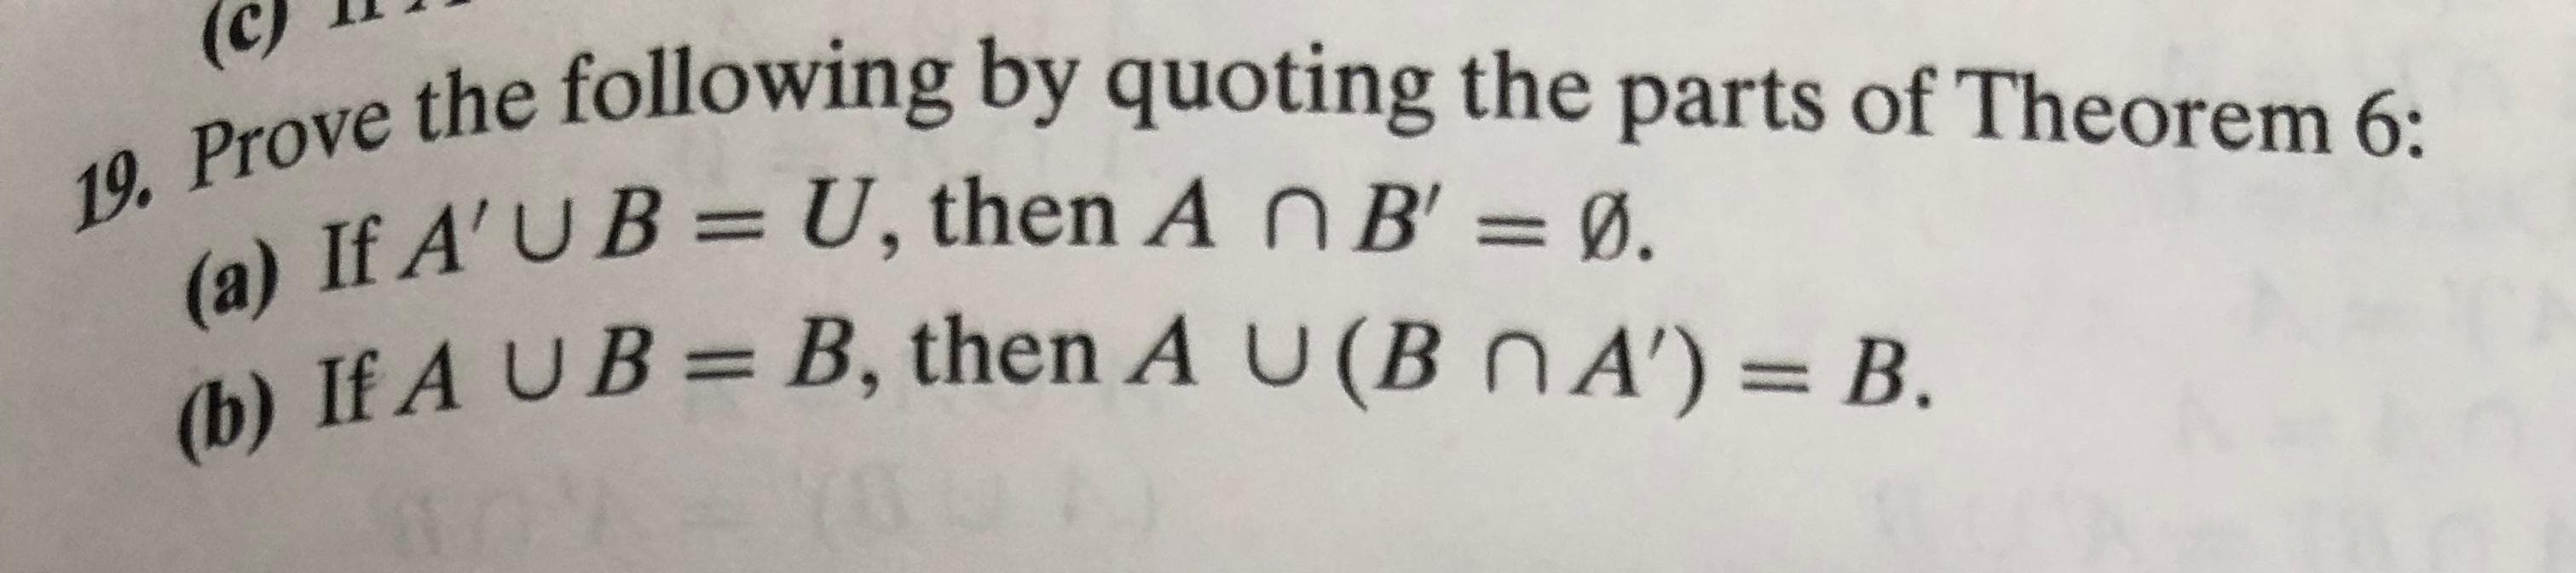 19. Prove the following by quoting the parts of Theorem 6:
(a) If A'UB = U, then A nB' = !
(b) If A UB = B, then A U (B nA') = B.
